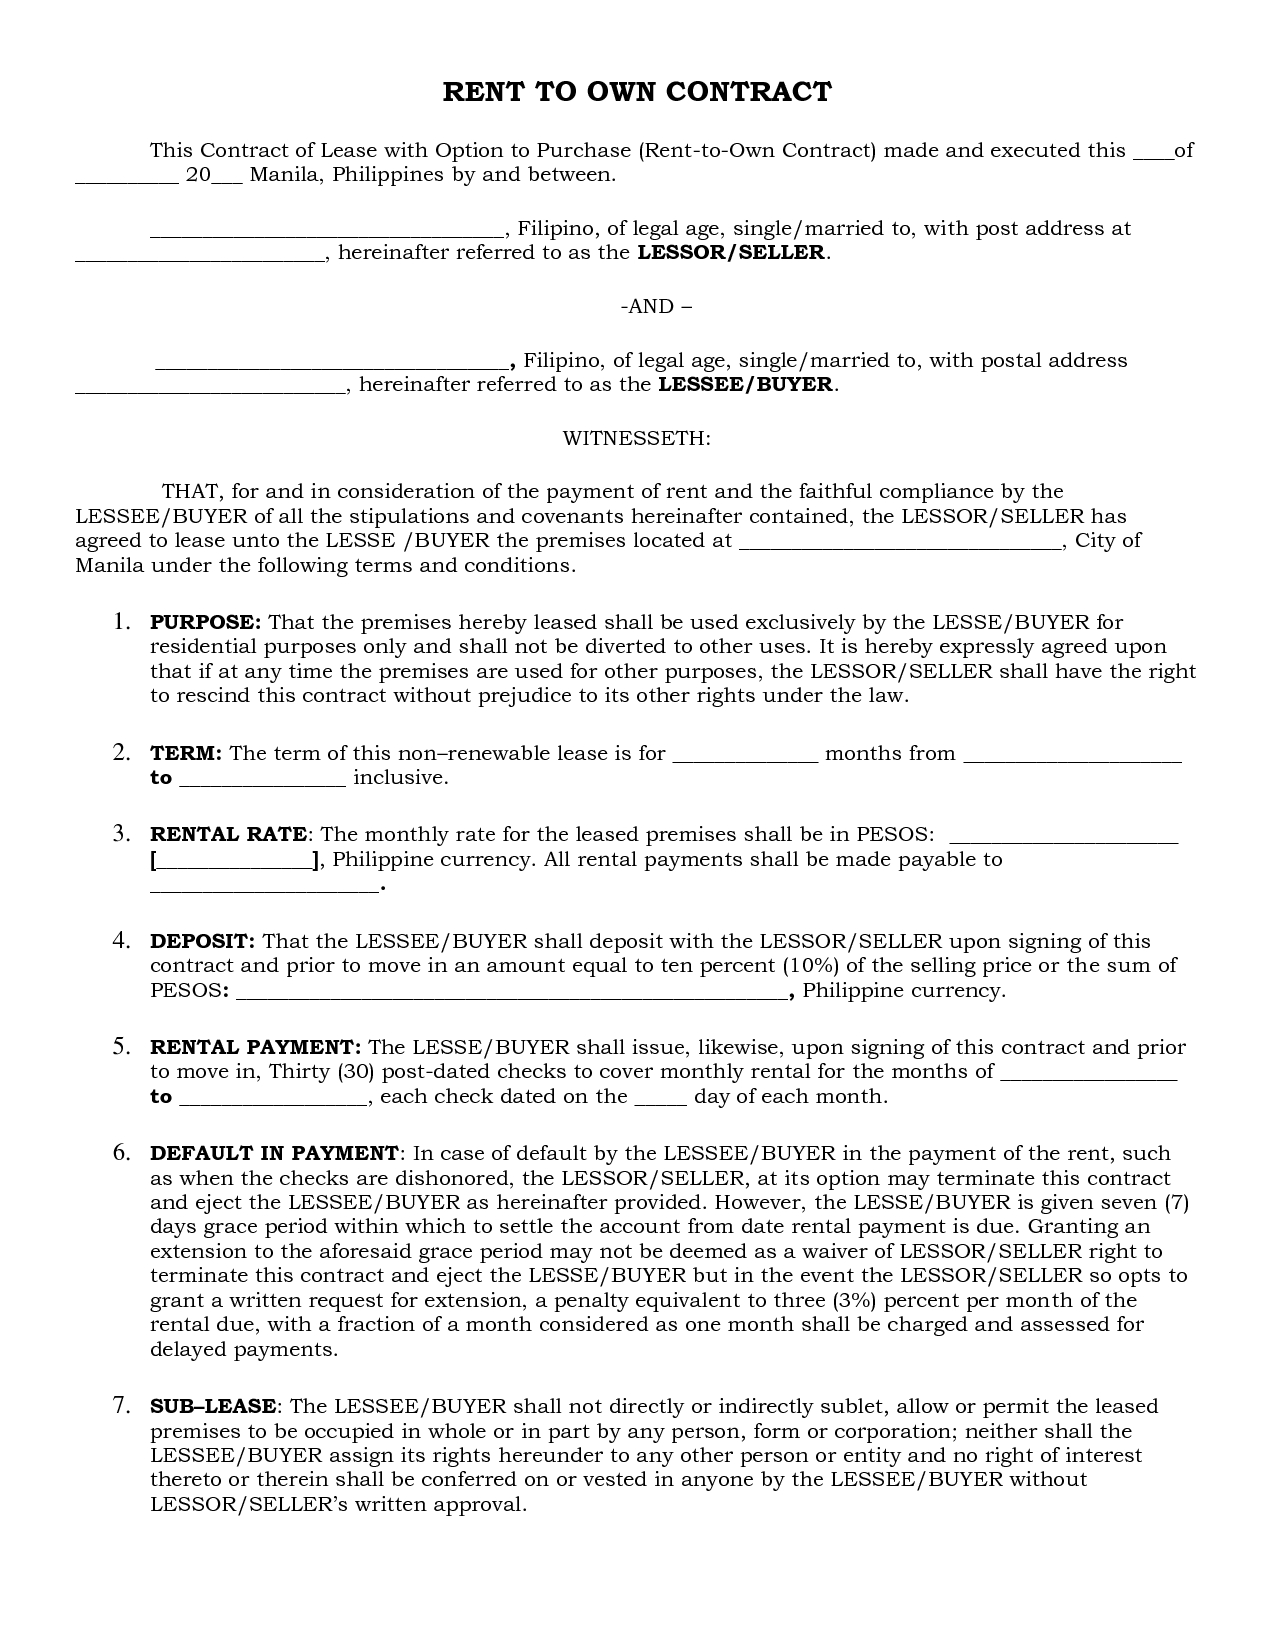 Lease And Purchase Agreement Lease Purchase Contract Wikipedia Rent To Own Agreement Template